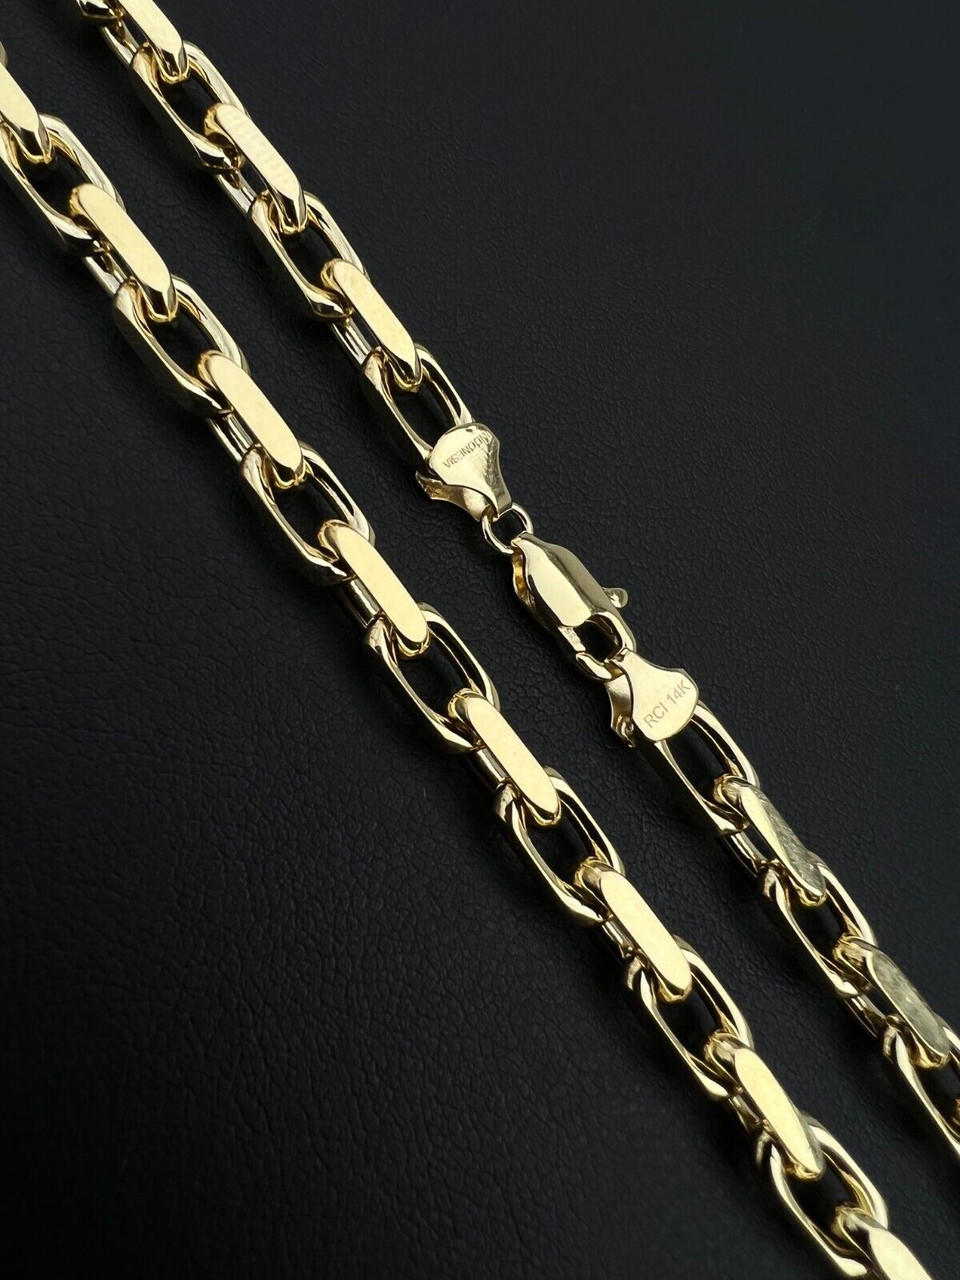 5mm Men's Real Solid 14k Yellow Gold Rolo Hermes Link Chain Necklace HEAVY  Link